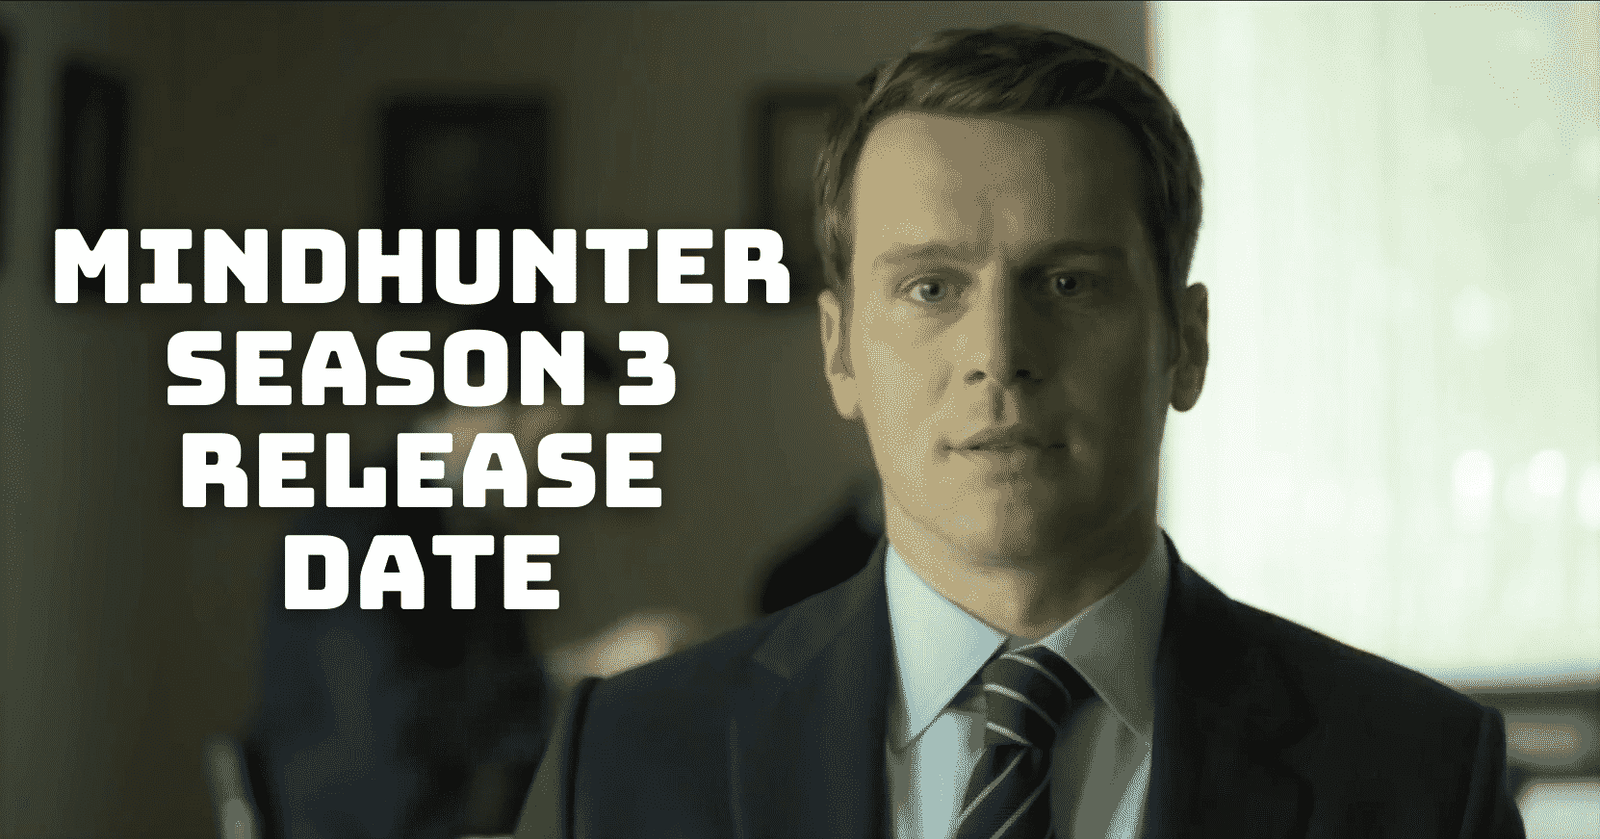 Mindhunter Season 3 Release Date, Trailer - Is it Canceled?